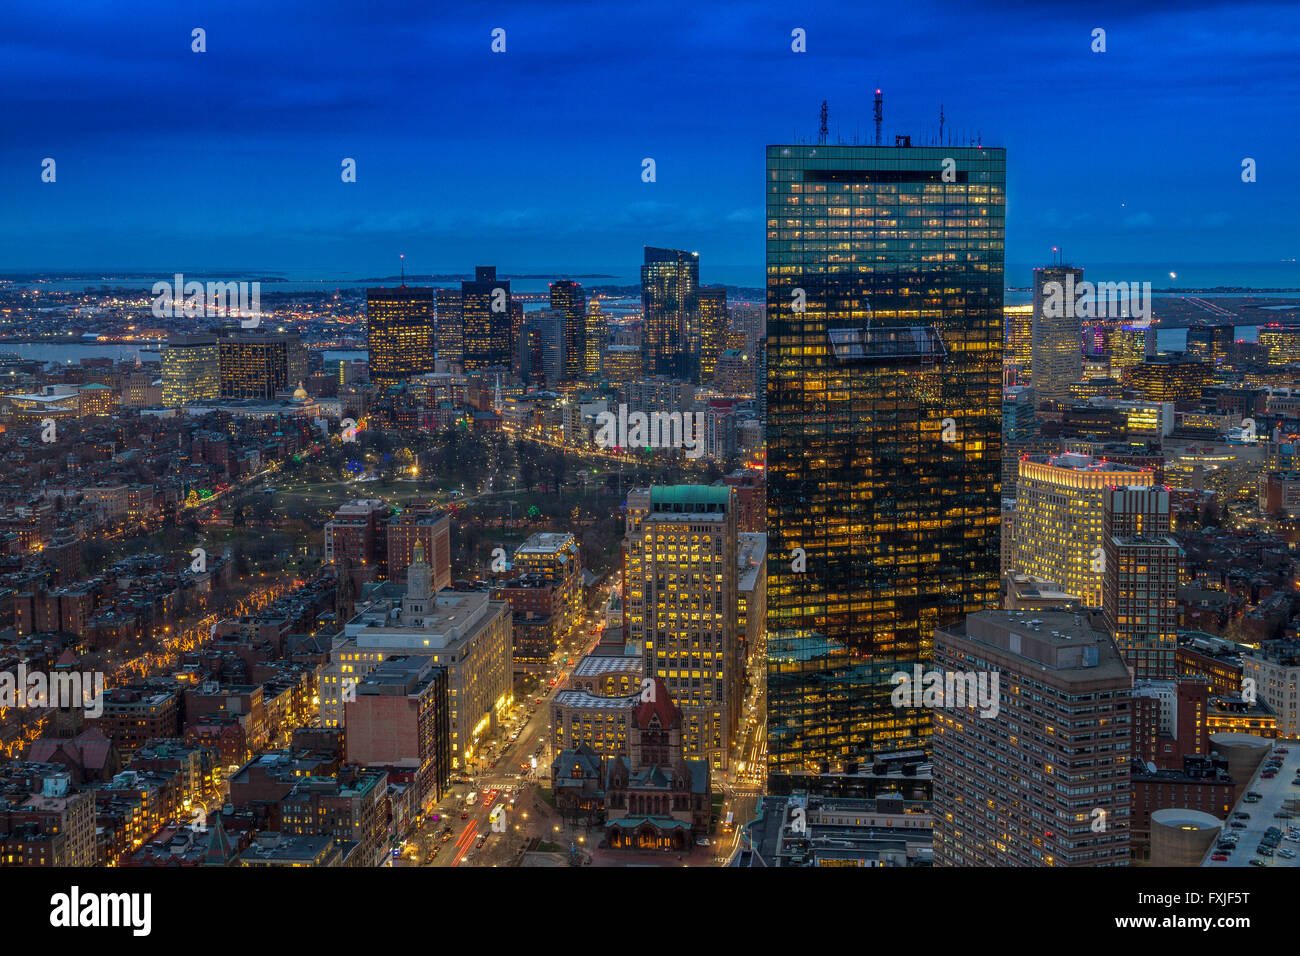 Aerial view of The City of Boston at night seen from The Prudential Tower, Boston, Massachusetts  USA Stock Photo